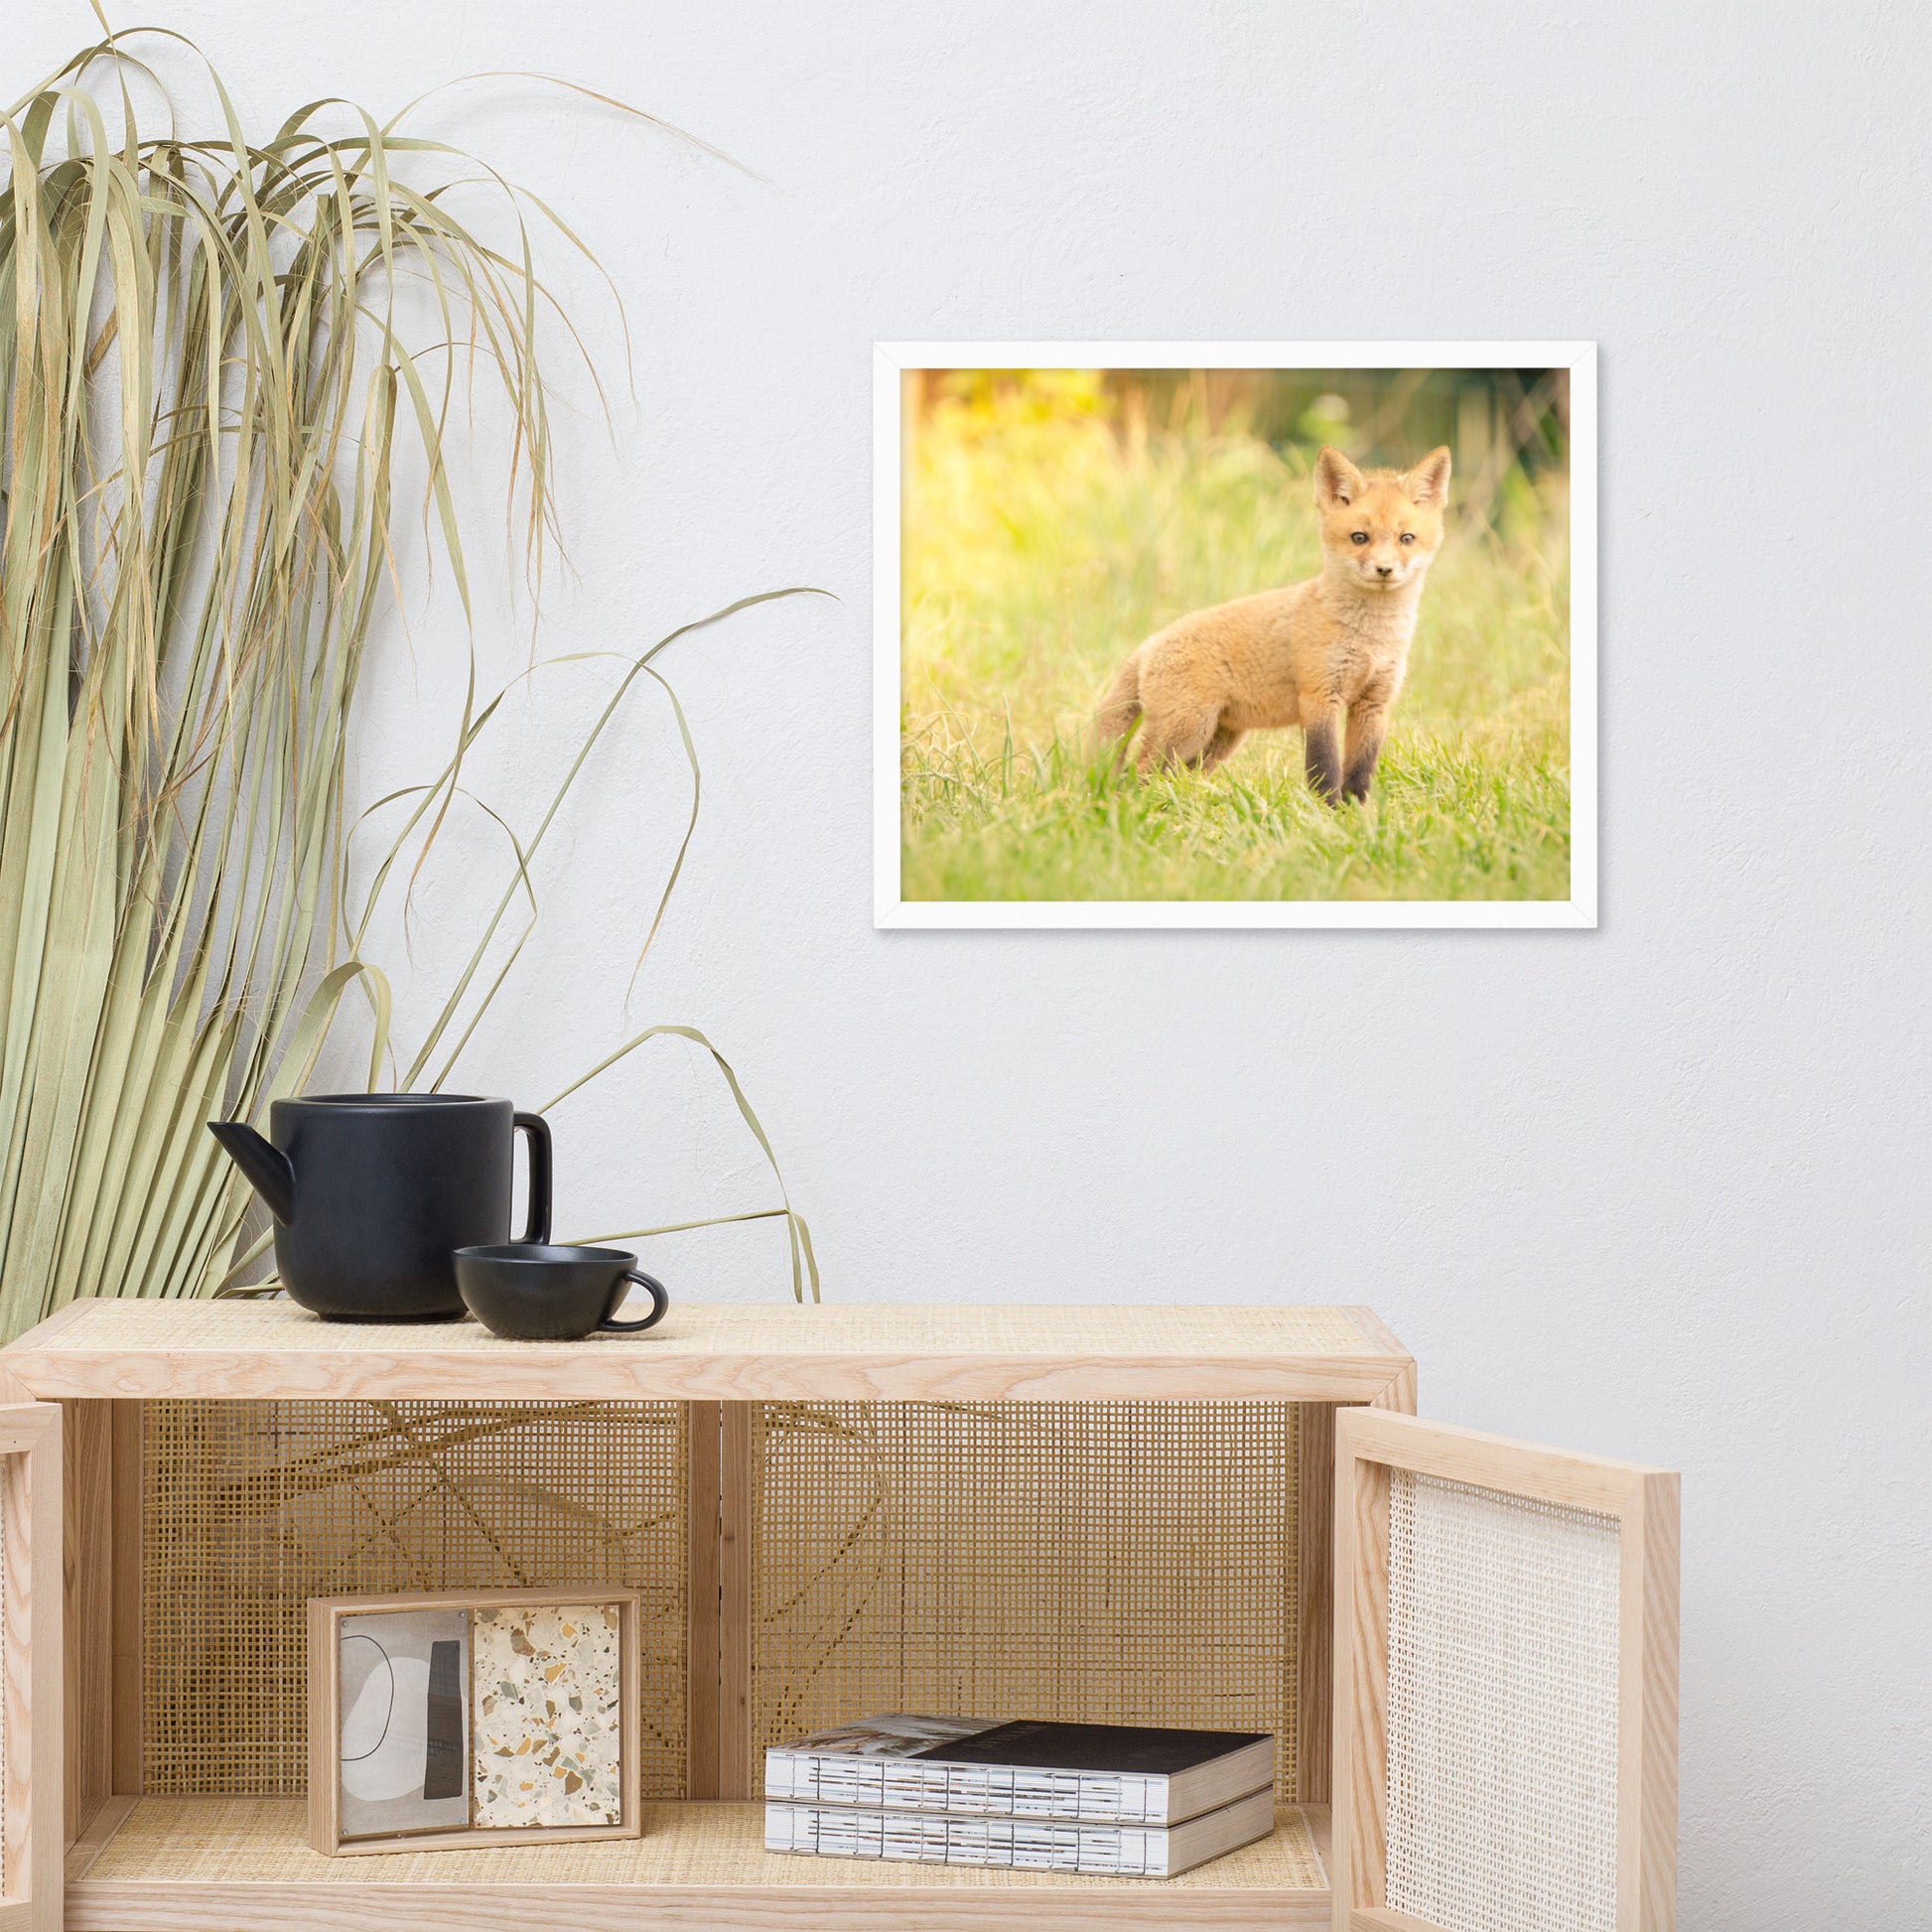 Over The Crib Wall Decor: Baby Red Fox in the Sun - Animal / Wildlife / Nature Artwork - Wall Decor - Framed Wall Art Print